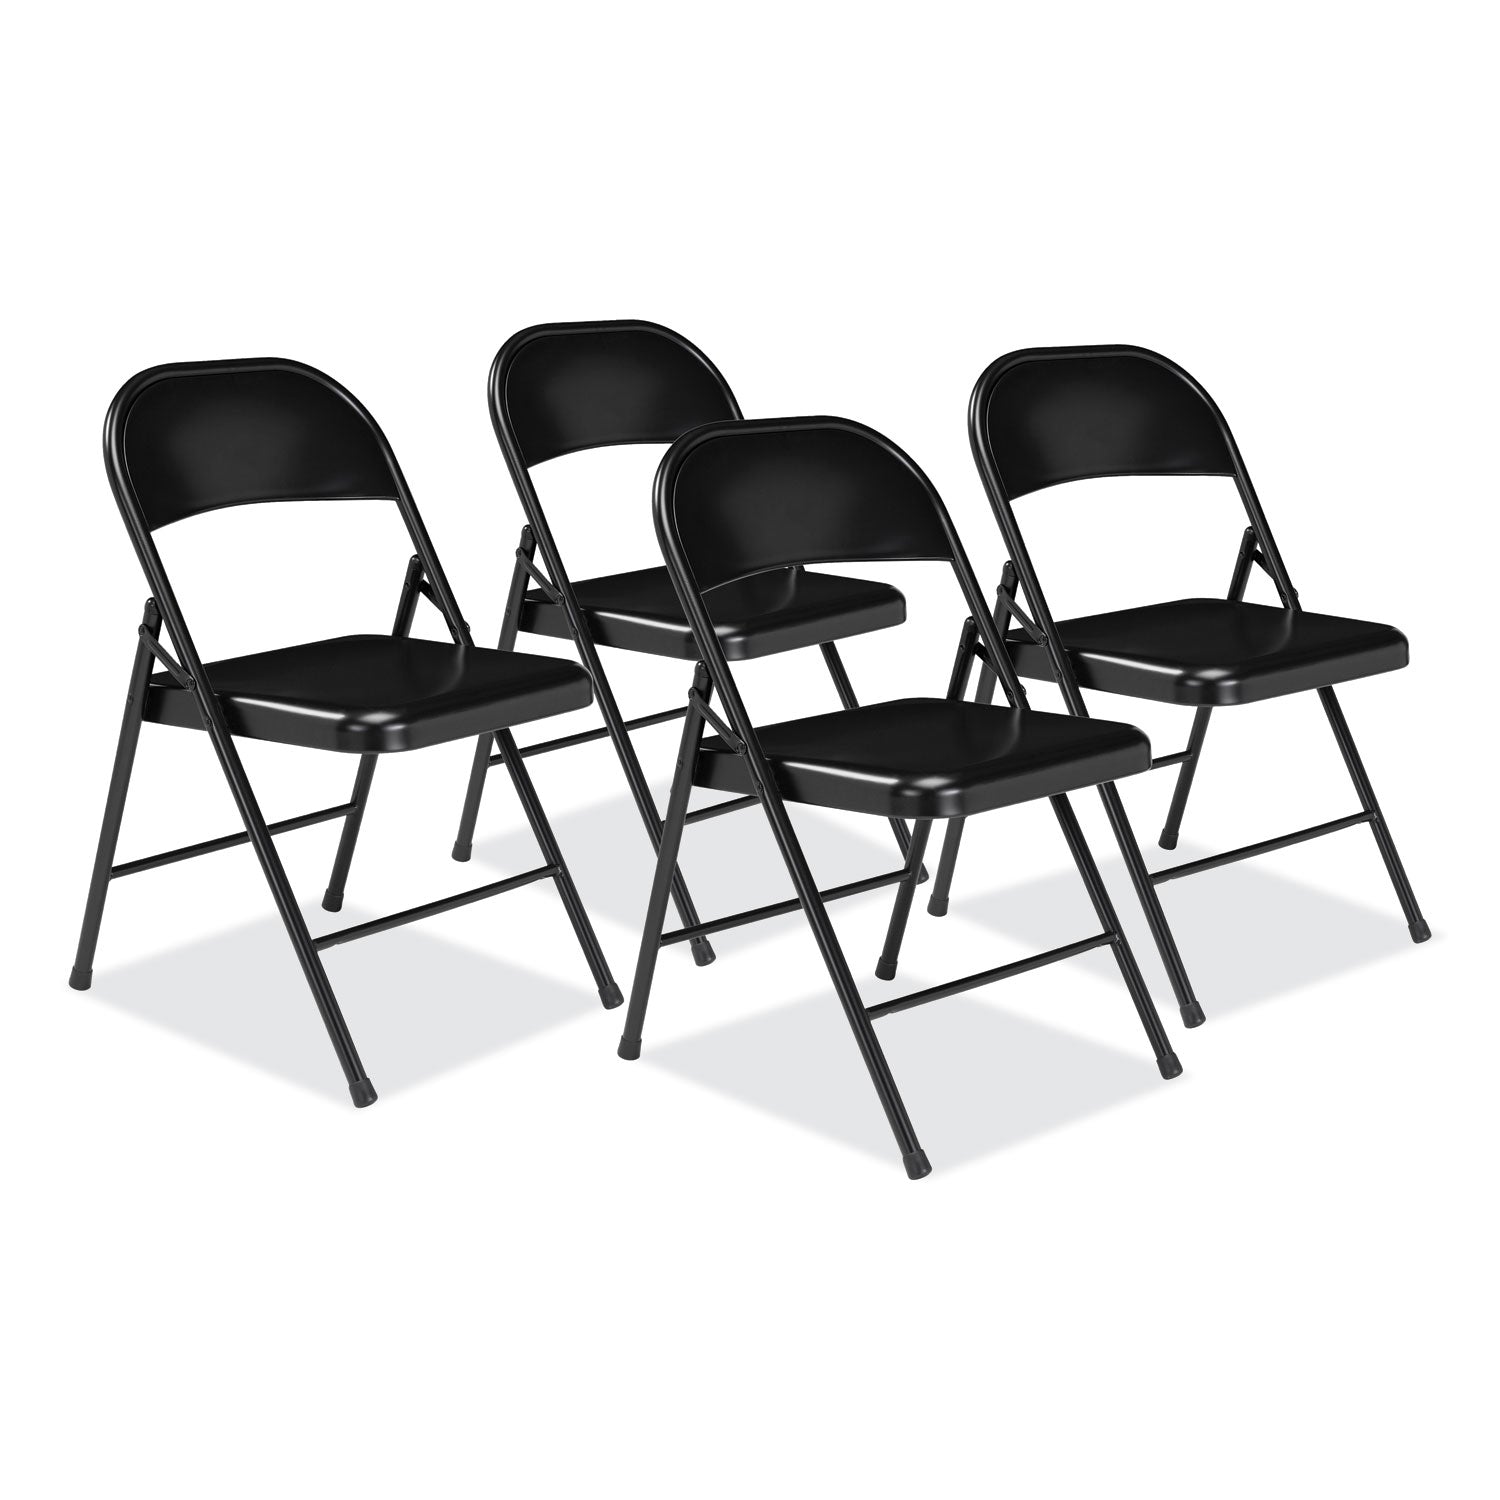 900-series-all-steel-folding-chair-supports-250lb-1775-seat-height-black-seat-back-base-4-ctships-in-1-3-business-days_nps910 - 1